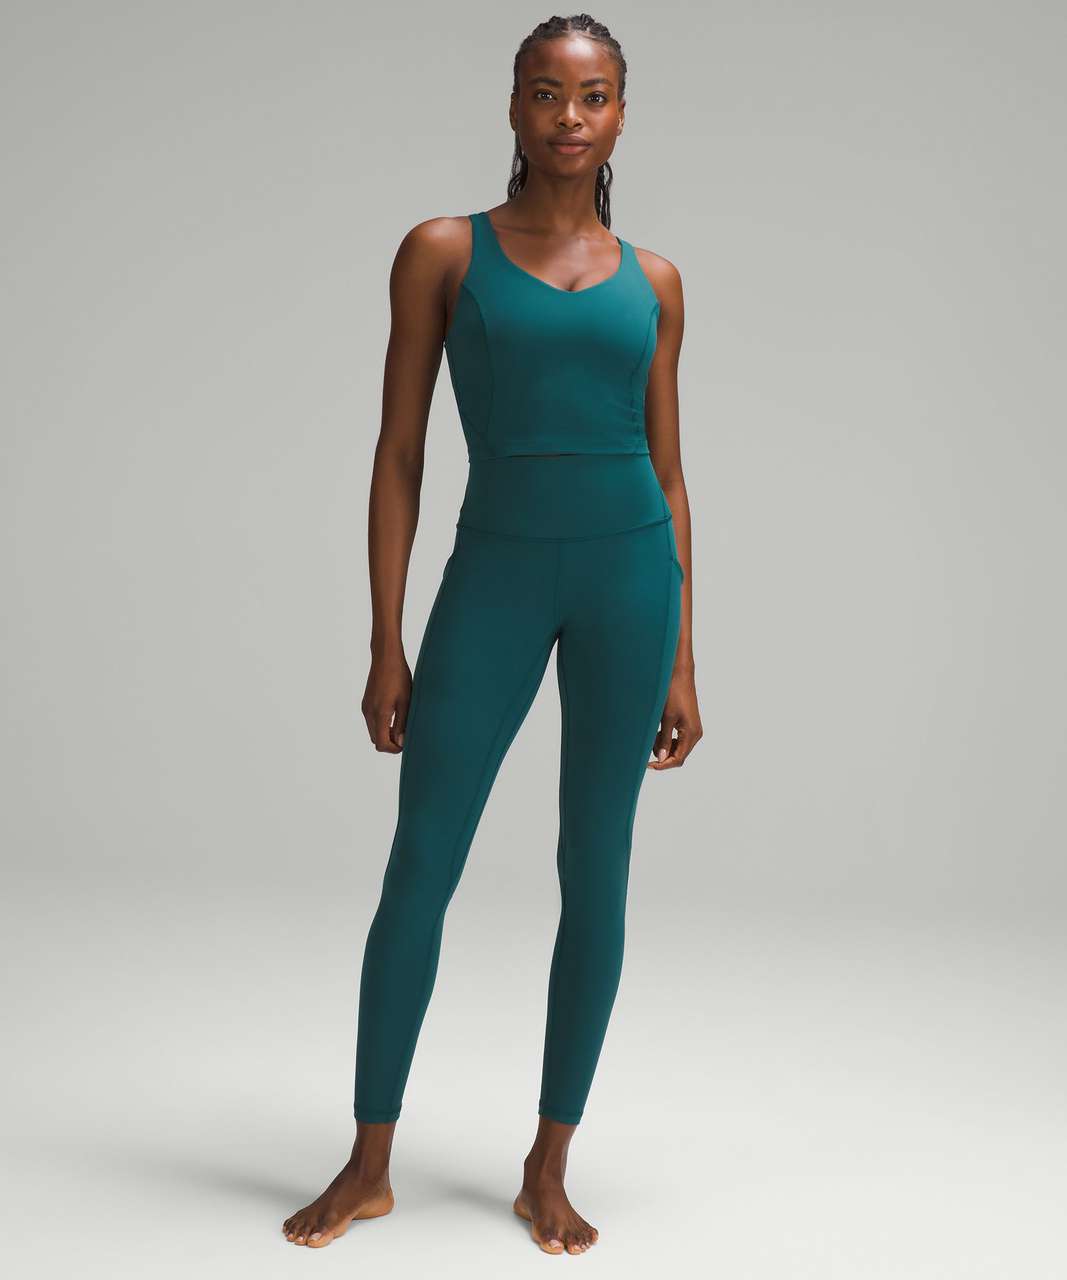 Lululemon Align Tank Green Size 4 - $34 (50% Off Retail) - From Emily